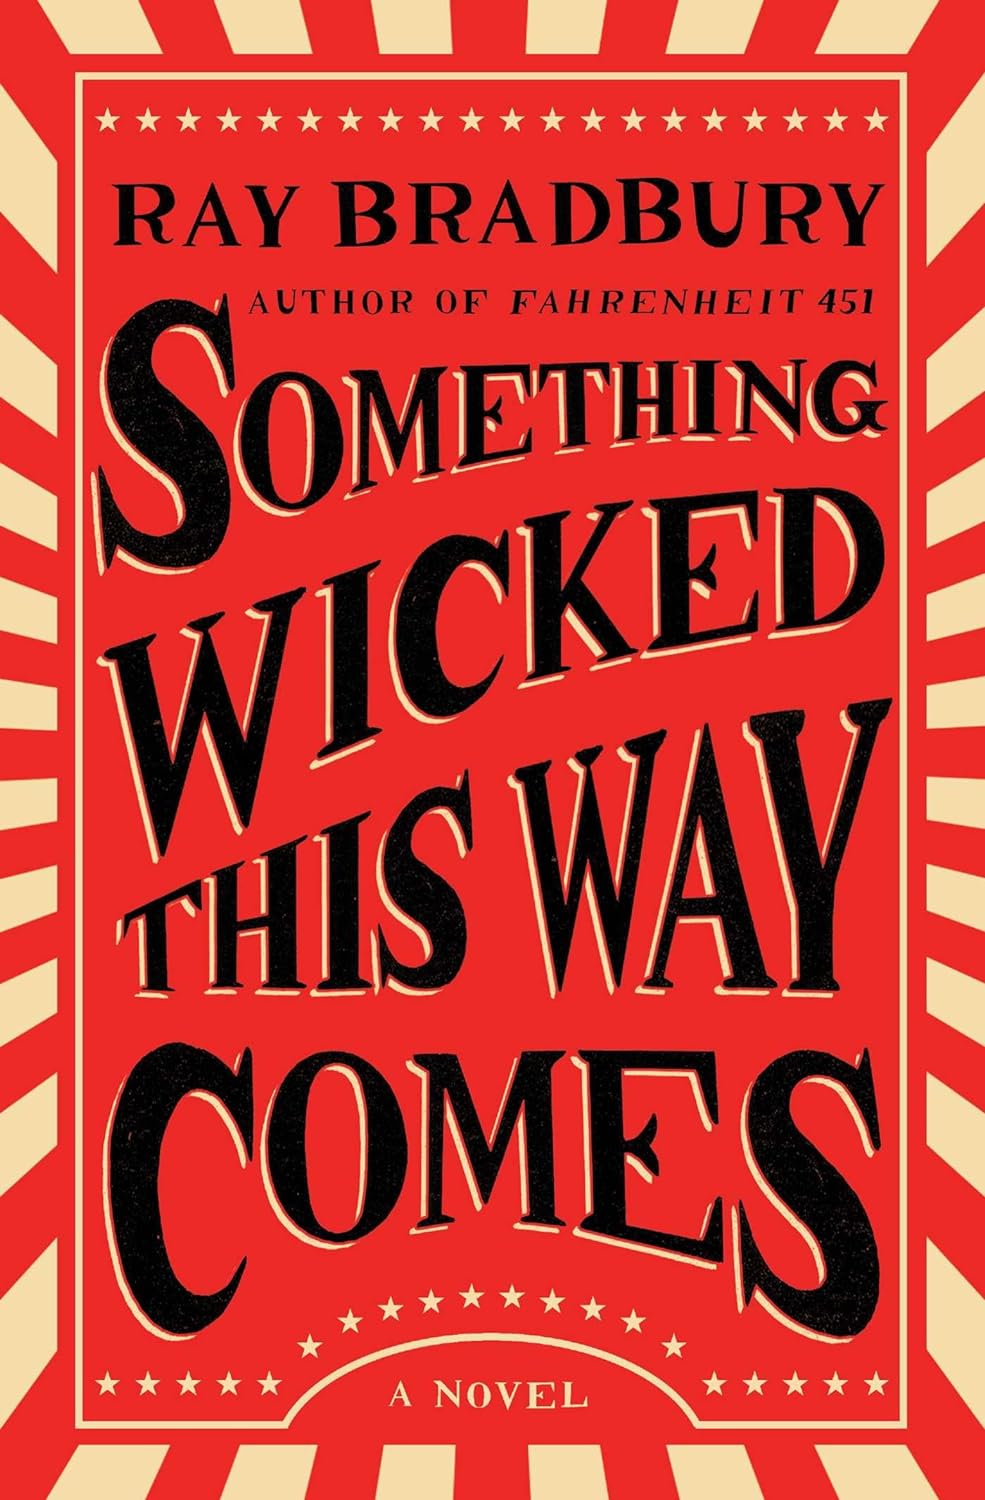 Simon & Schuster Something Wicked This Way Comes, by Ray Bradbury